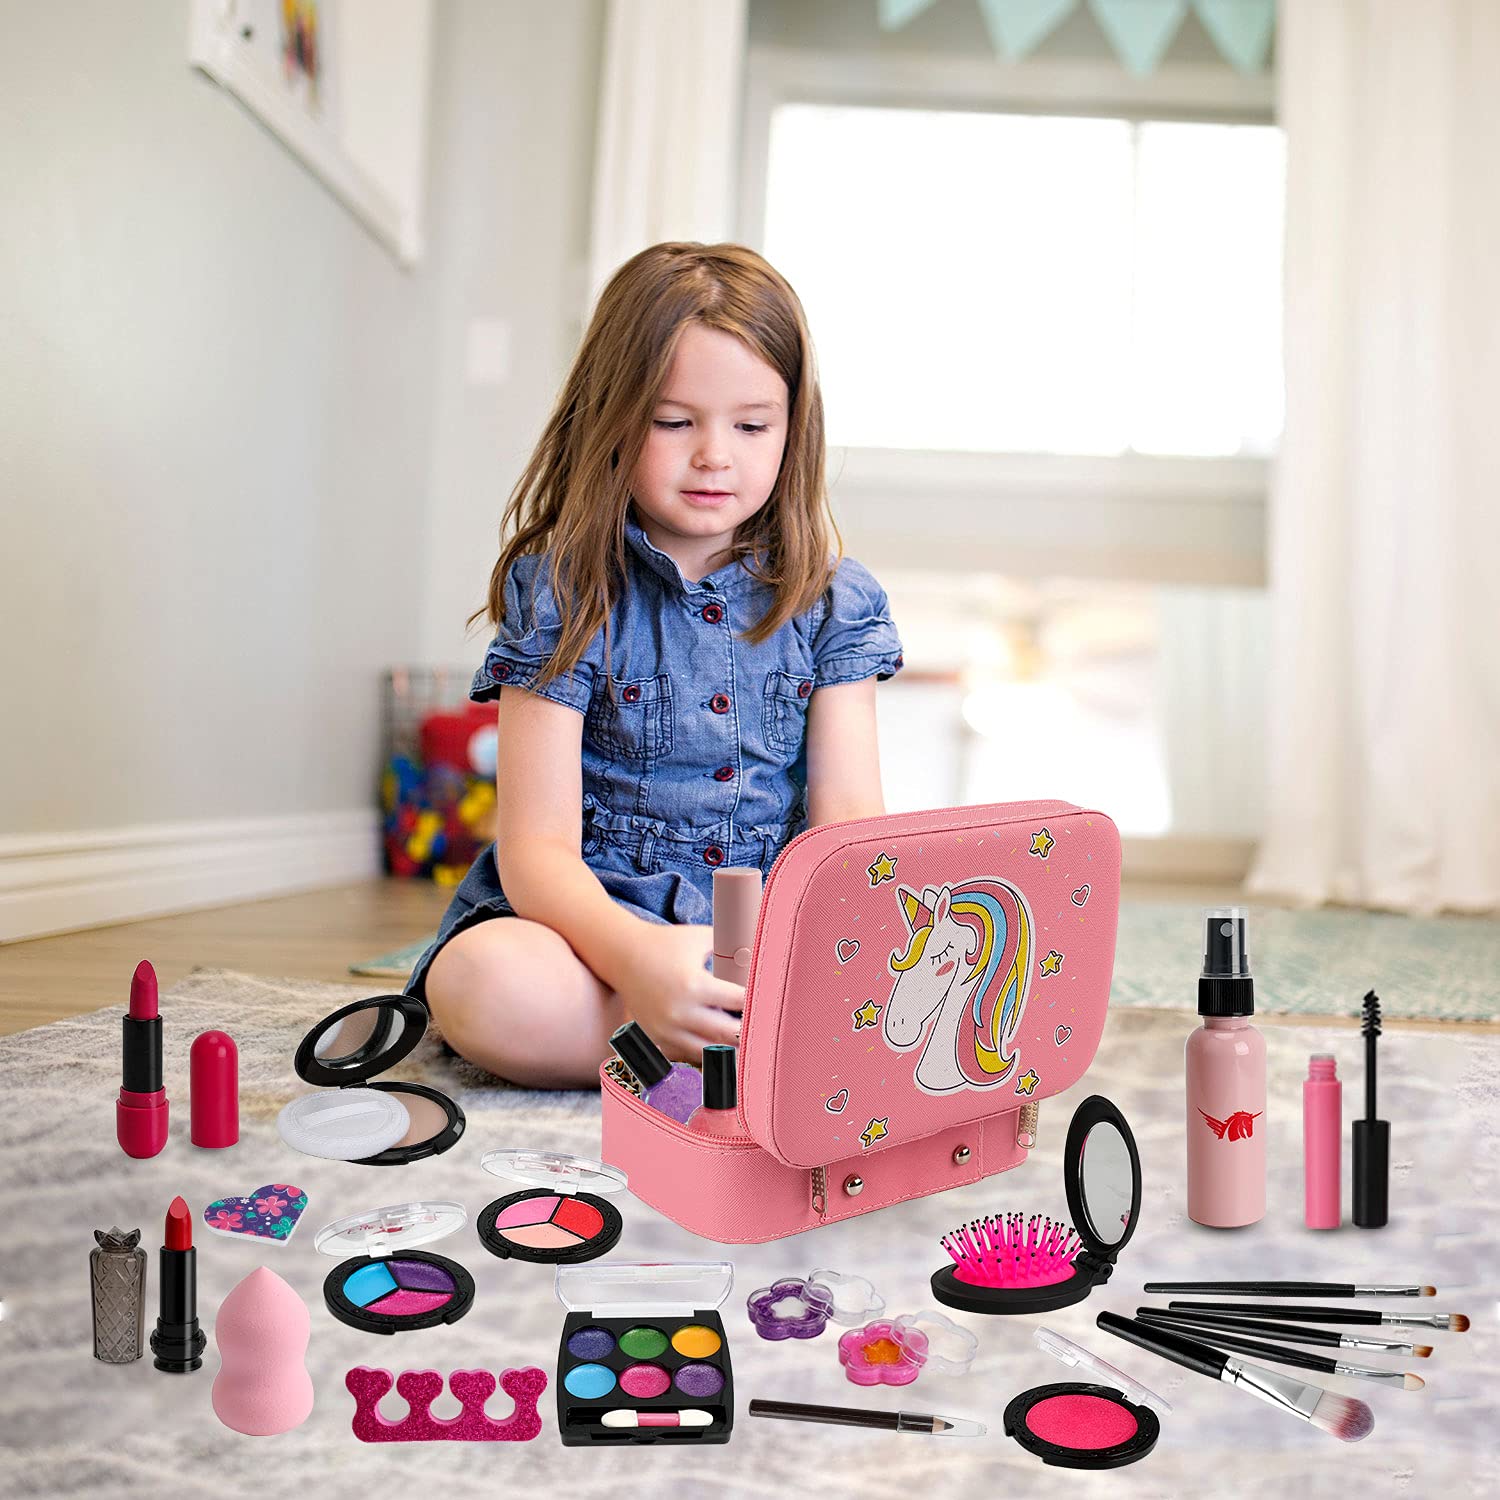 Flybay Kids Makeup Kit for Girls, Real Makeup Set, Washable Makeup Kit Toys for Little Girls Child Pretend Play Makeup for 4 5 6 7 Years Old Birthday Gifts Toys.